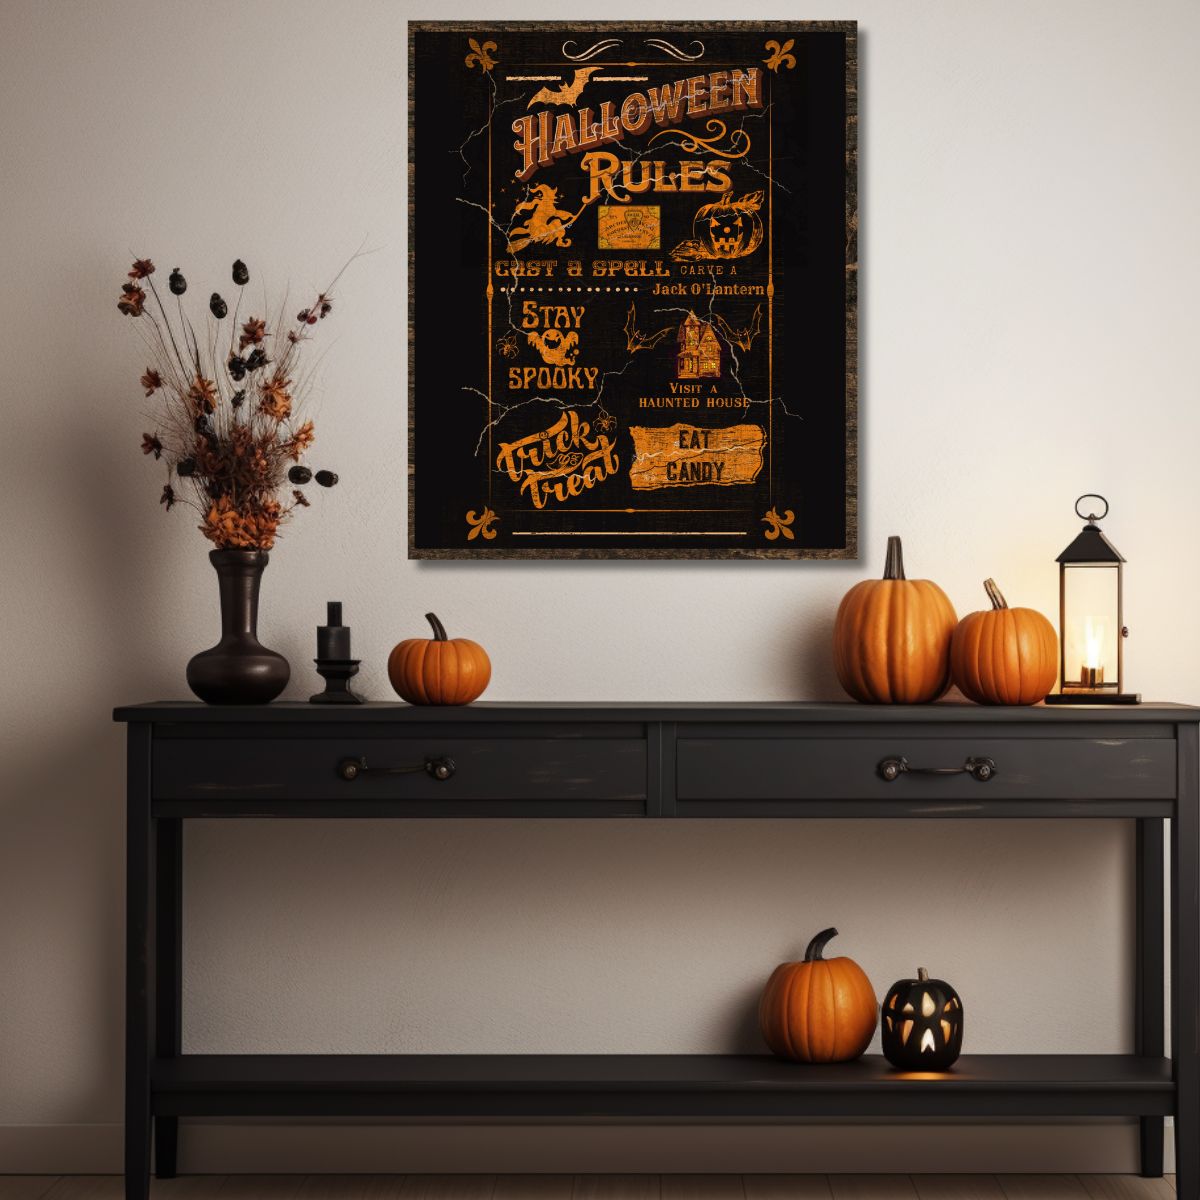 Halloween Rules Wood Sign